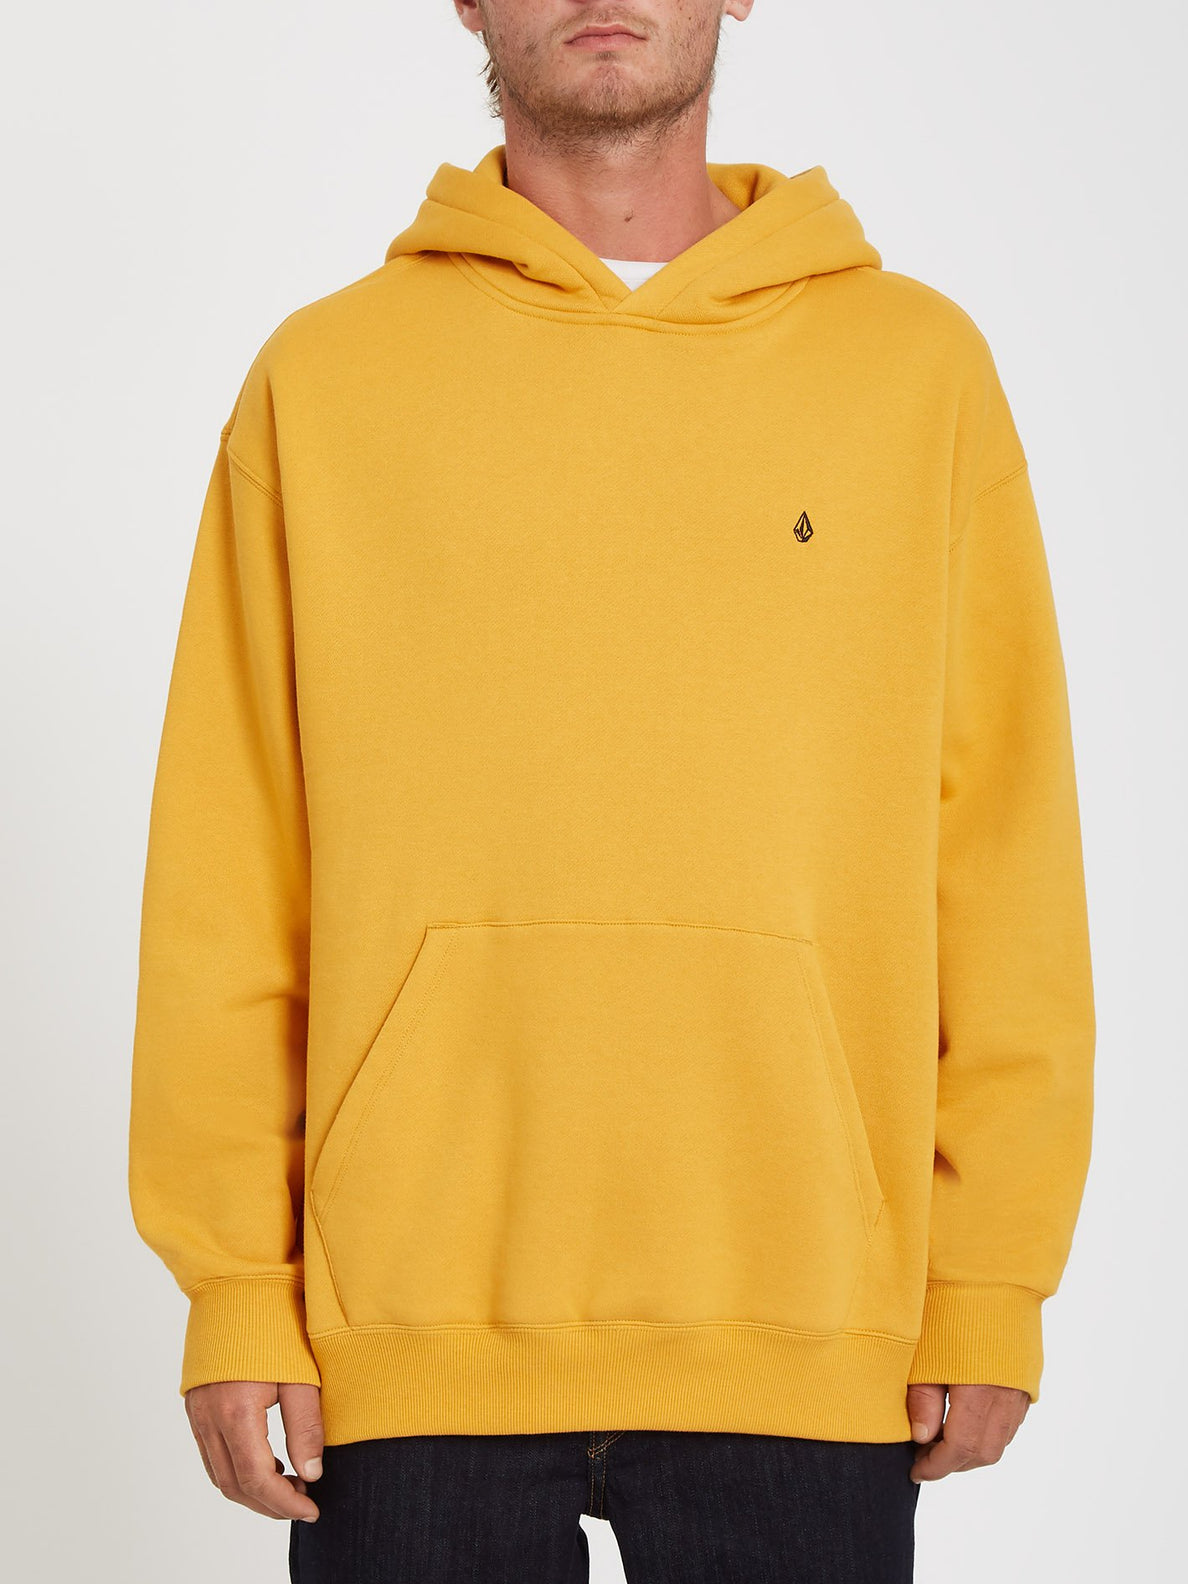 Erith Hoodie - VINTAGE GOLD (A4112110_VGD) [F]